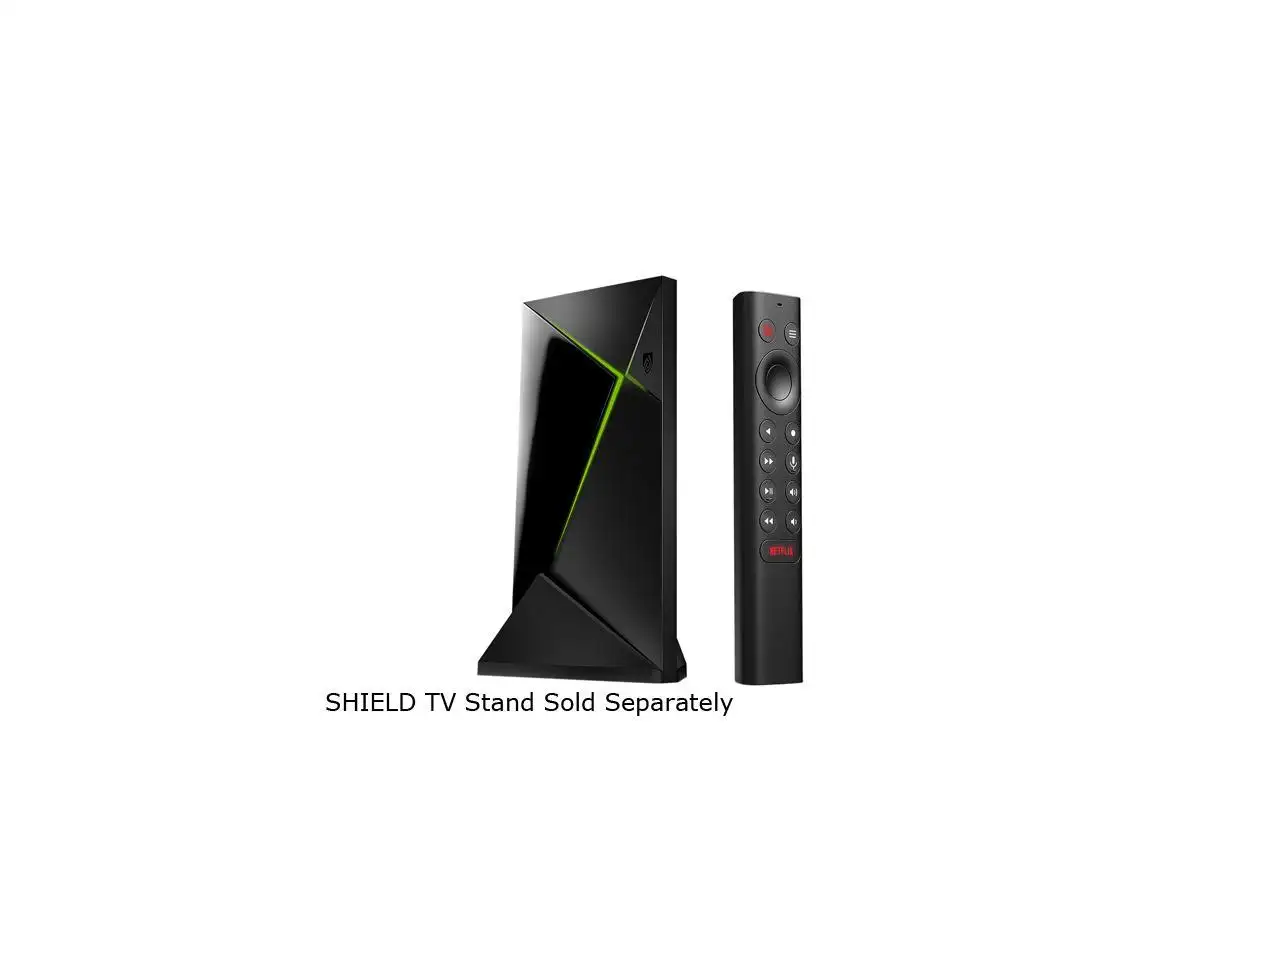 Nvidia Shield Android TV Pro HDR 4K Streaming Player + $5 Newegg GC